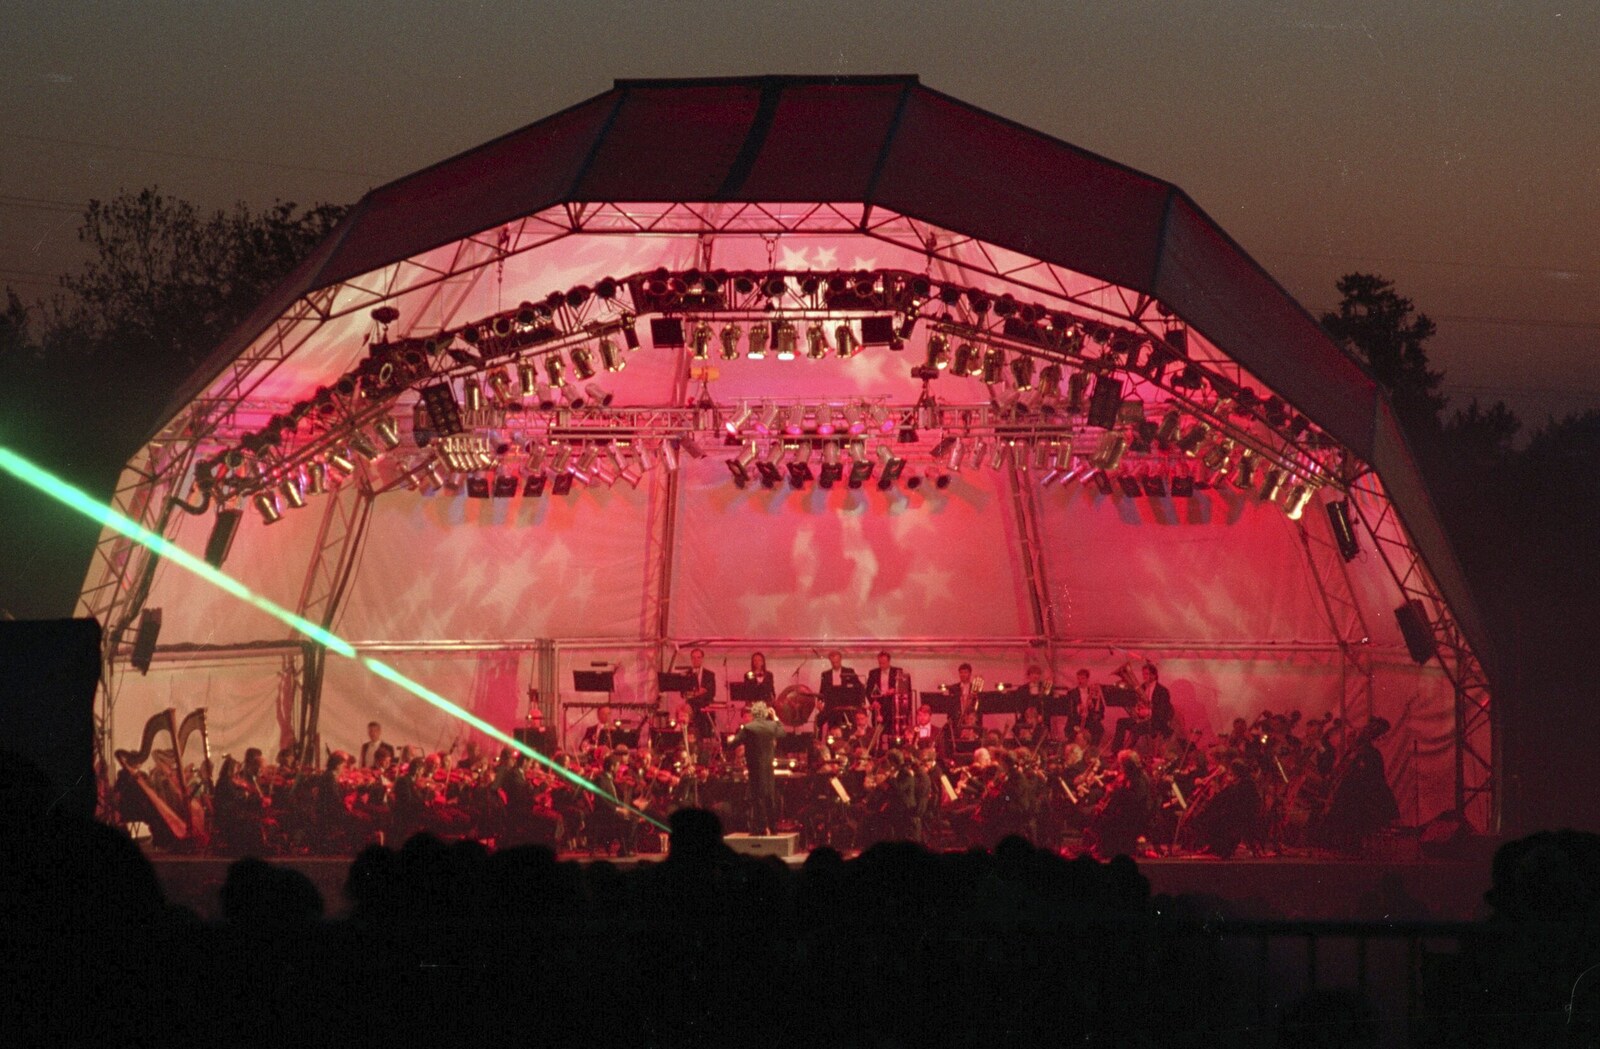 Earlham Classics, Earlham Park, Norwich, Norfolk - 9th May 1992: A single laser beam blasts out of the orchestra pit